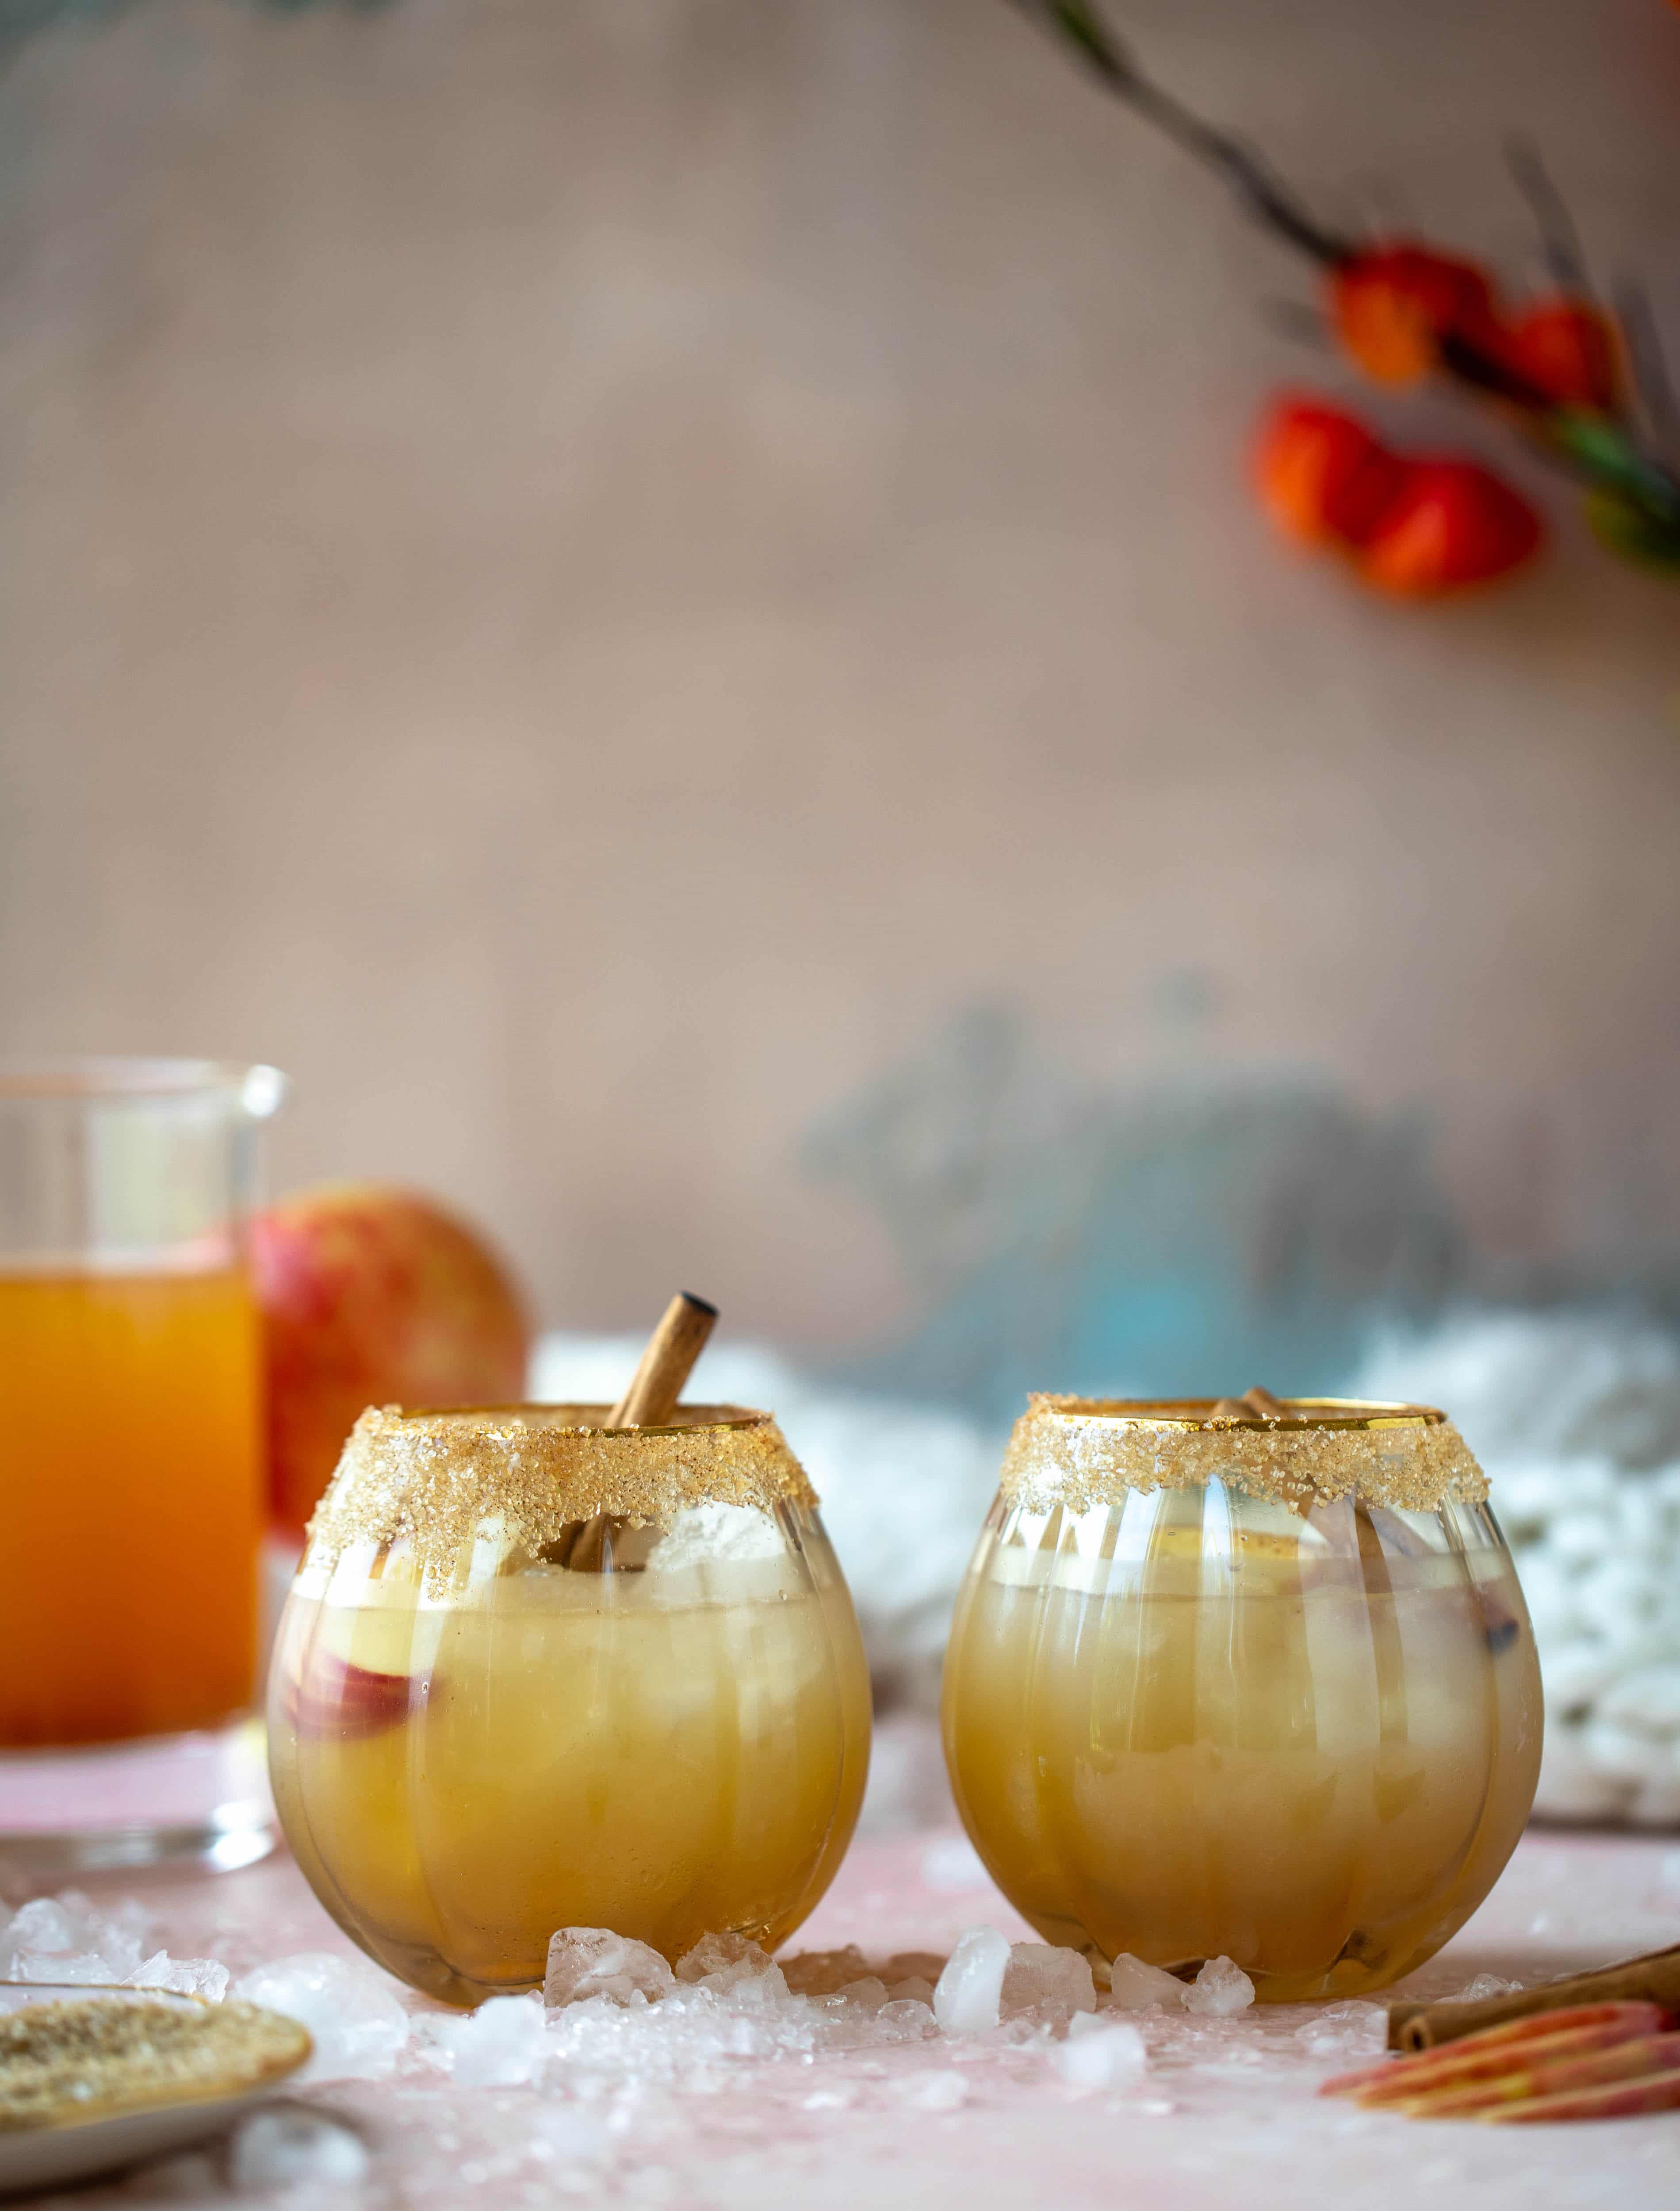 This apple cider mezcal margarita is a delicious, smoky cocktail for fall! It's warming and refreshing and delicious all at once. Cheers!